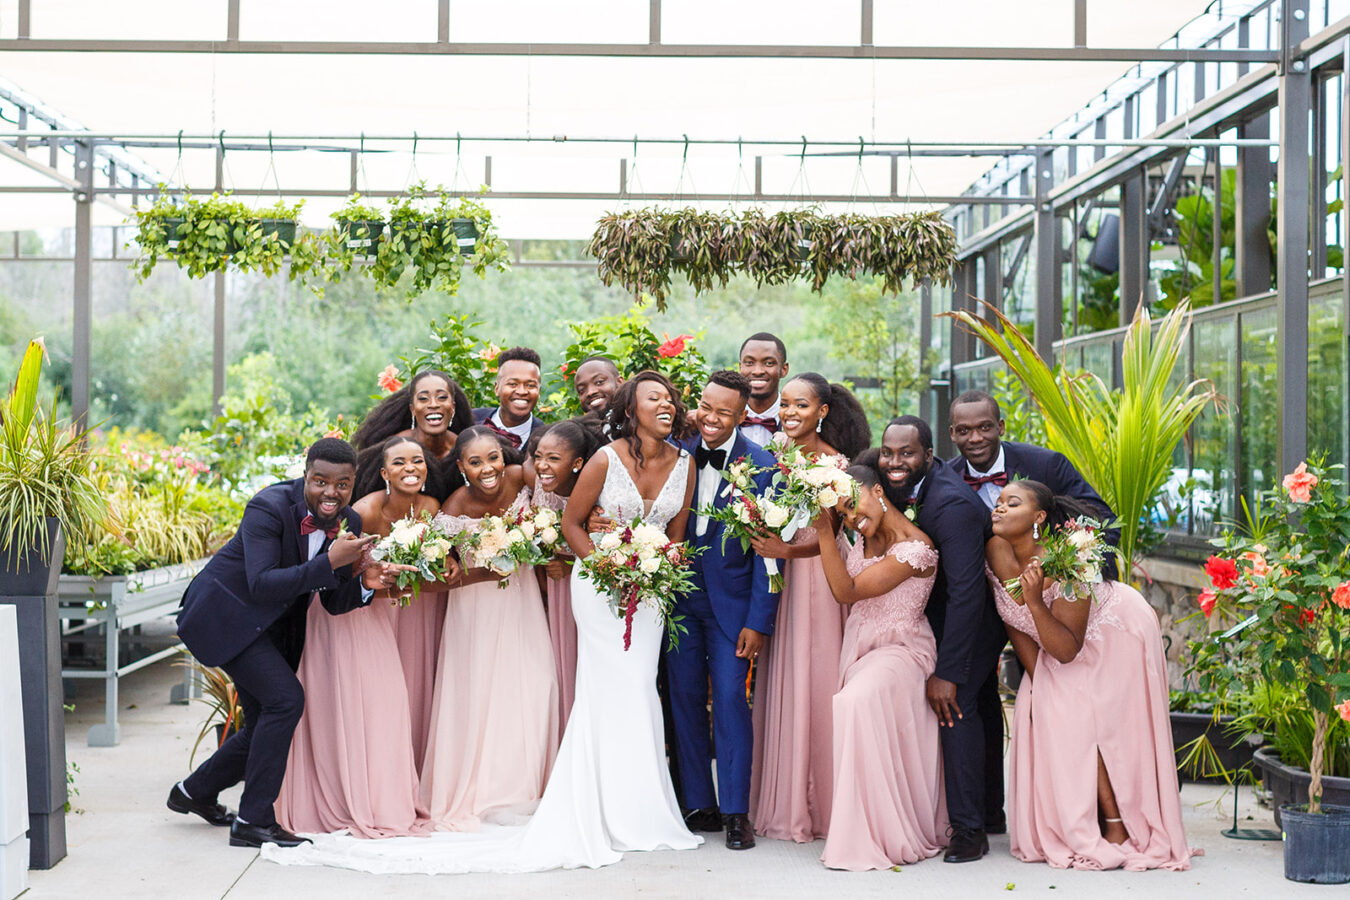 A bridal party laugh in a greenhouse